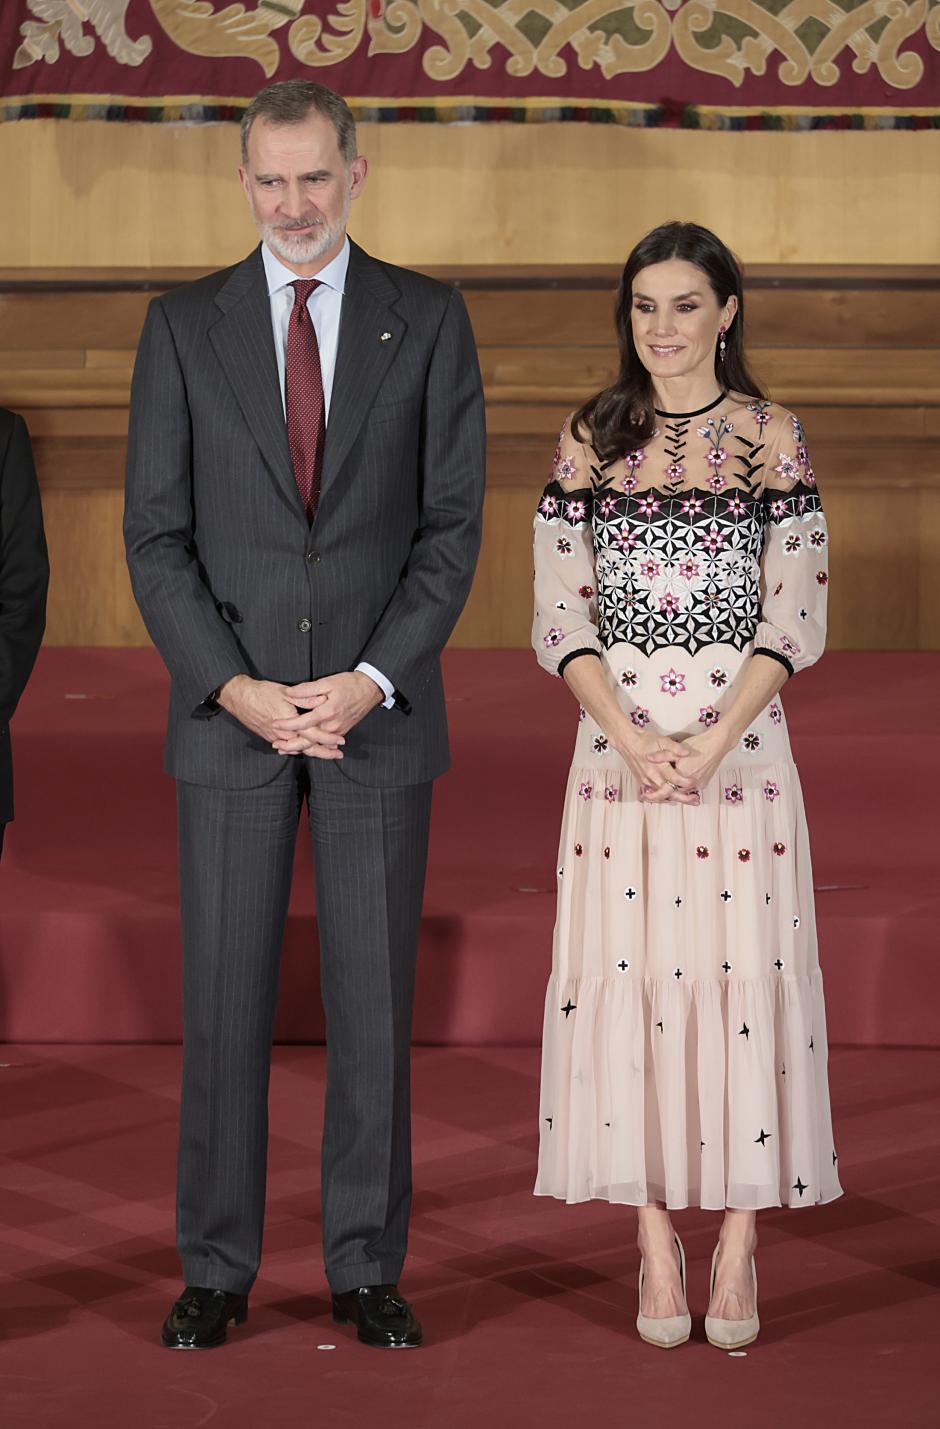 King Felipe VI and Queen Letizia during the  National Culture Awards 2021 in Zaragoza on February 2023